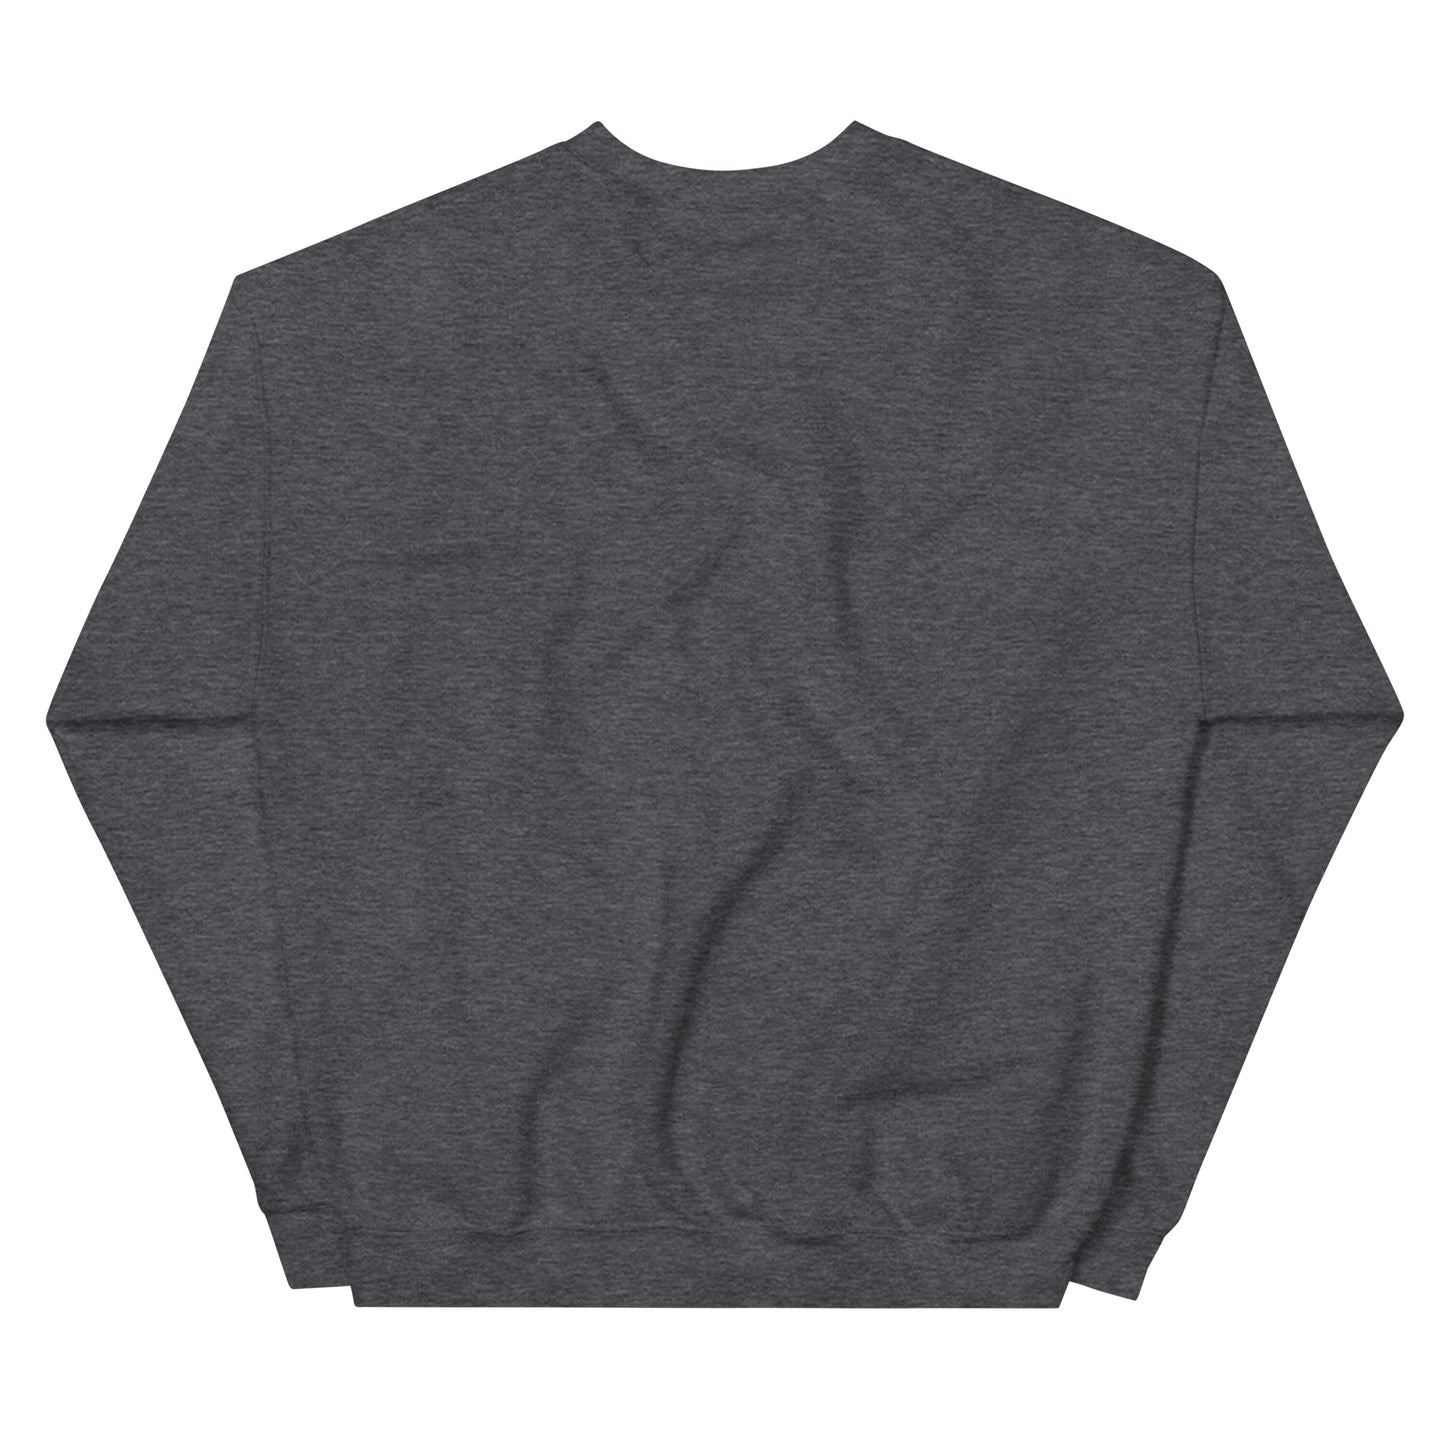 Storytellers in a Language of Chords Pullover